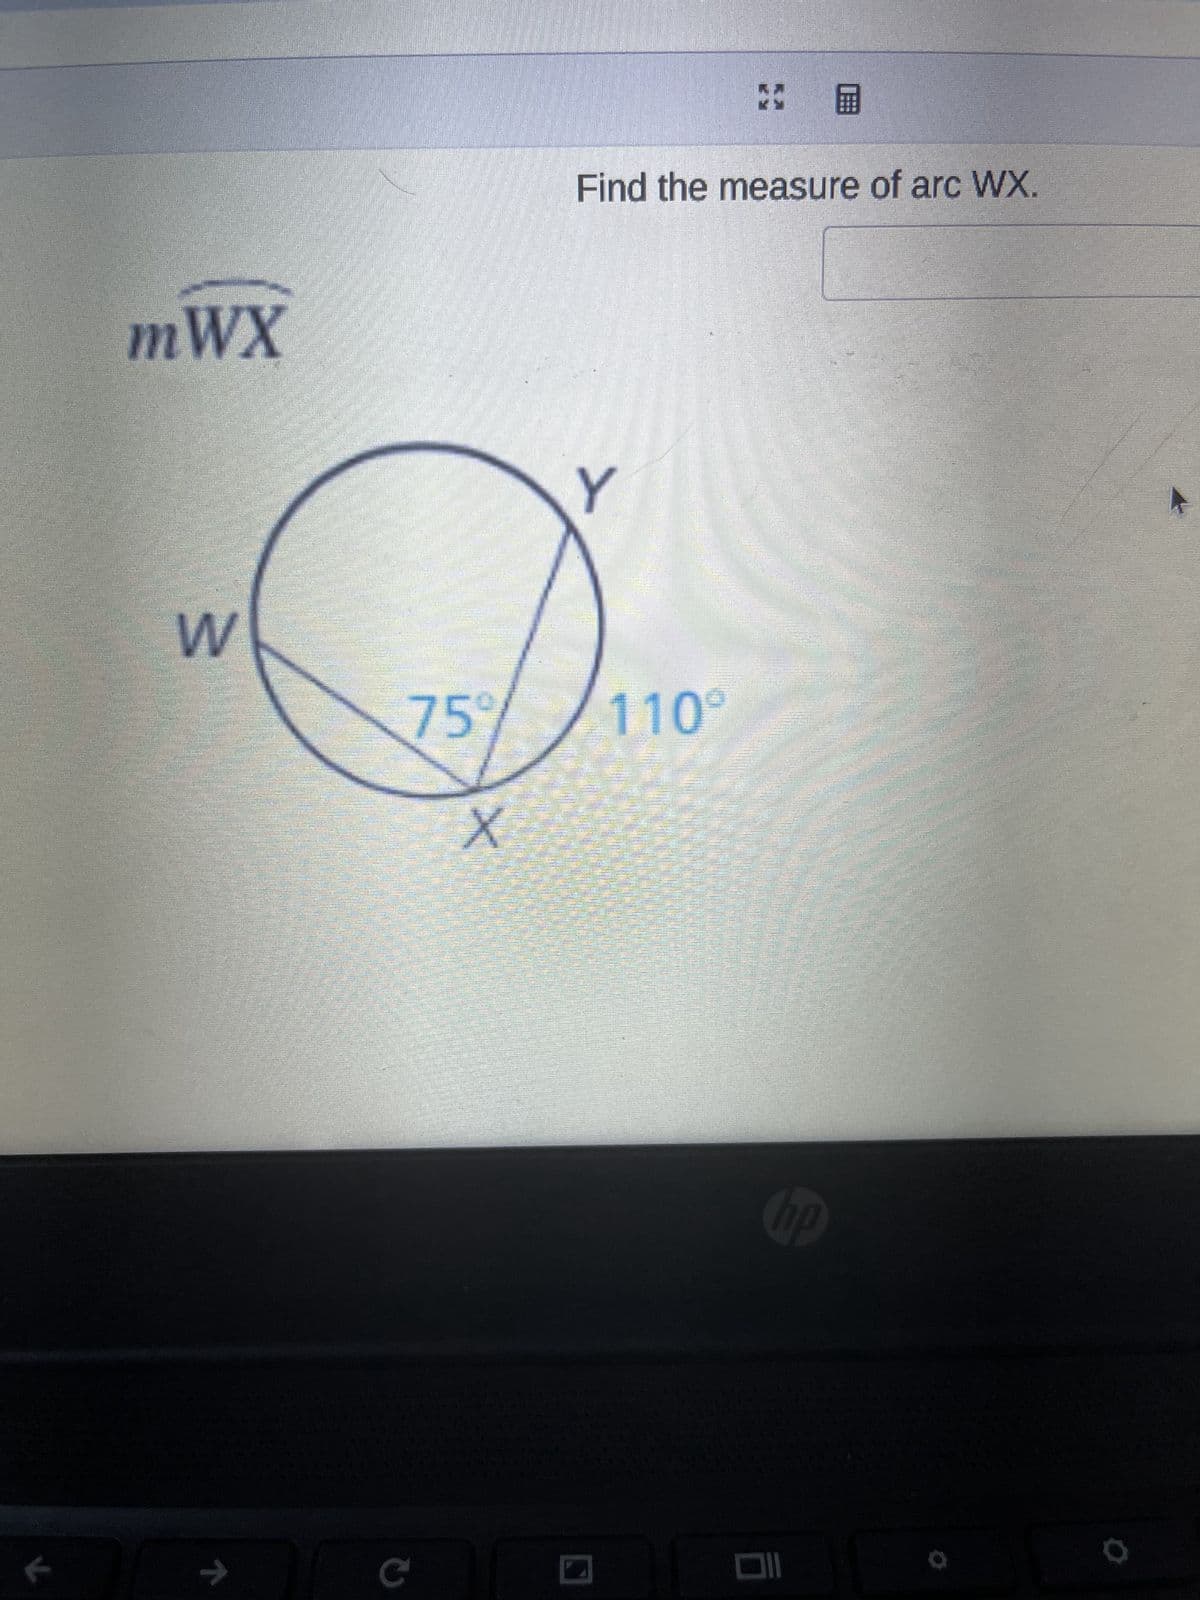 ### Measuring Arc Lengths in Circles

**Problem:** Find the measure of arc WX.

**Diagram Explanation:**
The diagram consists of a circle with three points labeled W, X, and Y on its circumference. Two angles are marked inside the circle, one at 75° between points W, X, and another point. The other angle is marked as 110° between points Y, X, and another point.

### Concepts and Steps:

1. **Understanding the Circle:**
   - A circle has 360 degrees.
   - Arcs in a circle can be measured in degrees, which is a part of the total 360 degrees of the entire circle.

2. **Angles and Arcs Relationship:**
   - The angle at the center of the circle is called the central angle.
   - The measure of an arc is equal to the measure of its central angle.

3. **Calculation:**
   - The angles provided are inside the circle.
   - To find the measure of arc WX, observe that it is opposite to an angle provided.
   - The sum of the angles in a circle around a point is 360°.

### Solution:
Given angles ∠YXW = 75° and ∠XWY = 110°,

- These angles are inside the circle, and together with the angles we are going to find.

To find the measure of arc WX, subtract from 360°:

\[ 360° - (75° + 110°) = 360° - 185° = 175° \]

Thus, the measure of arc WX is 175°.

### Conclusion:
The measure of arc WX is 175 degrees.

This method of measuring arc lengths is fundamental in geometry, specifically in topics involving circles and their properties. Understanding how to find arc lengths using given angles is crucial for solving more complex geometric problems.